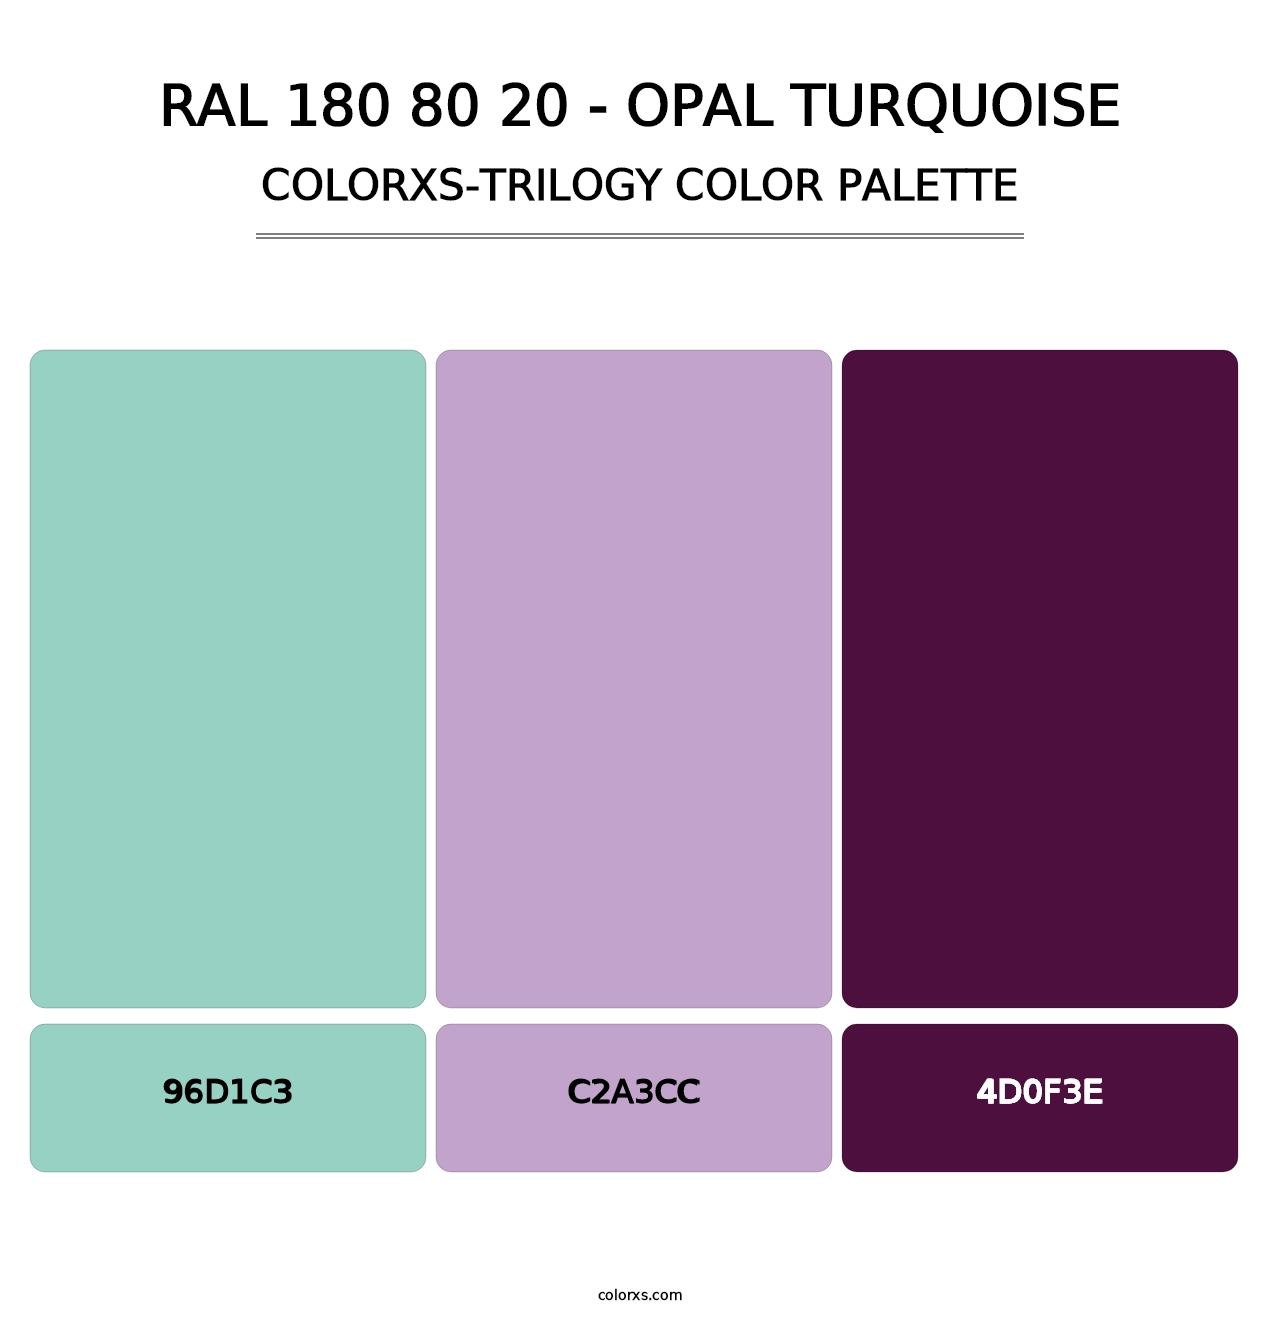 RAL 180 80 20 - Opal Turquoise - Colorxs Trilogy Palette